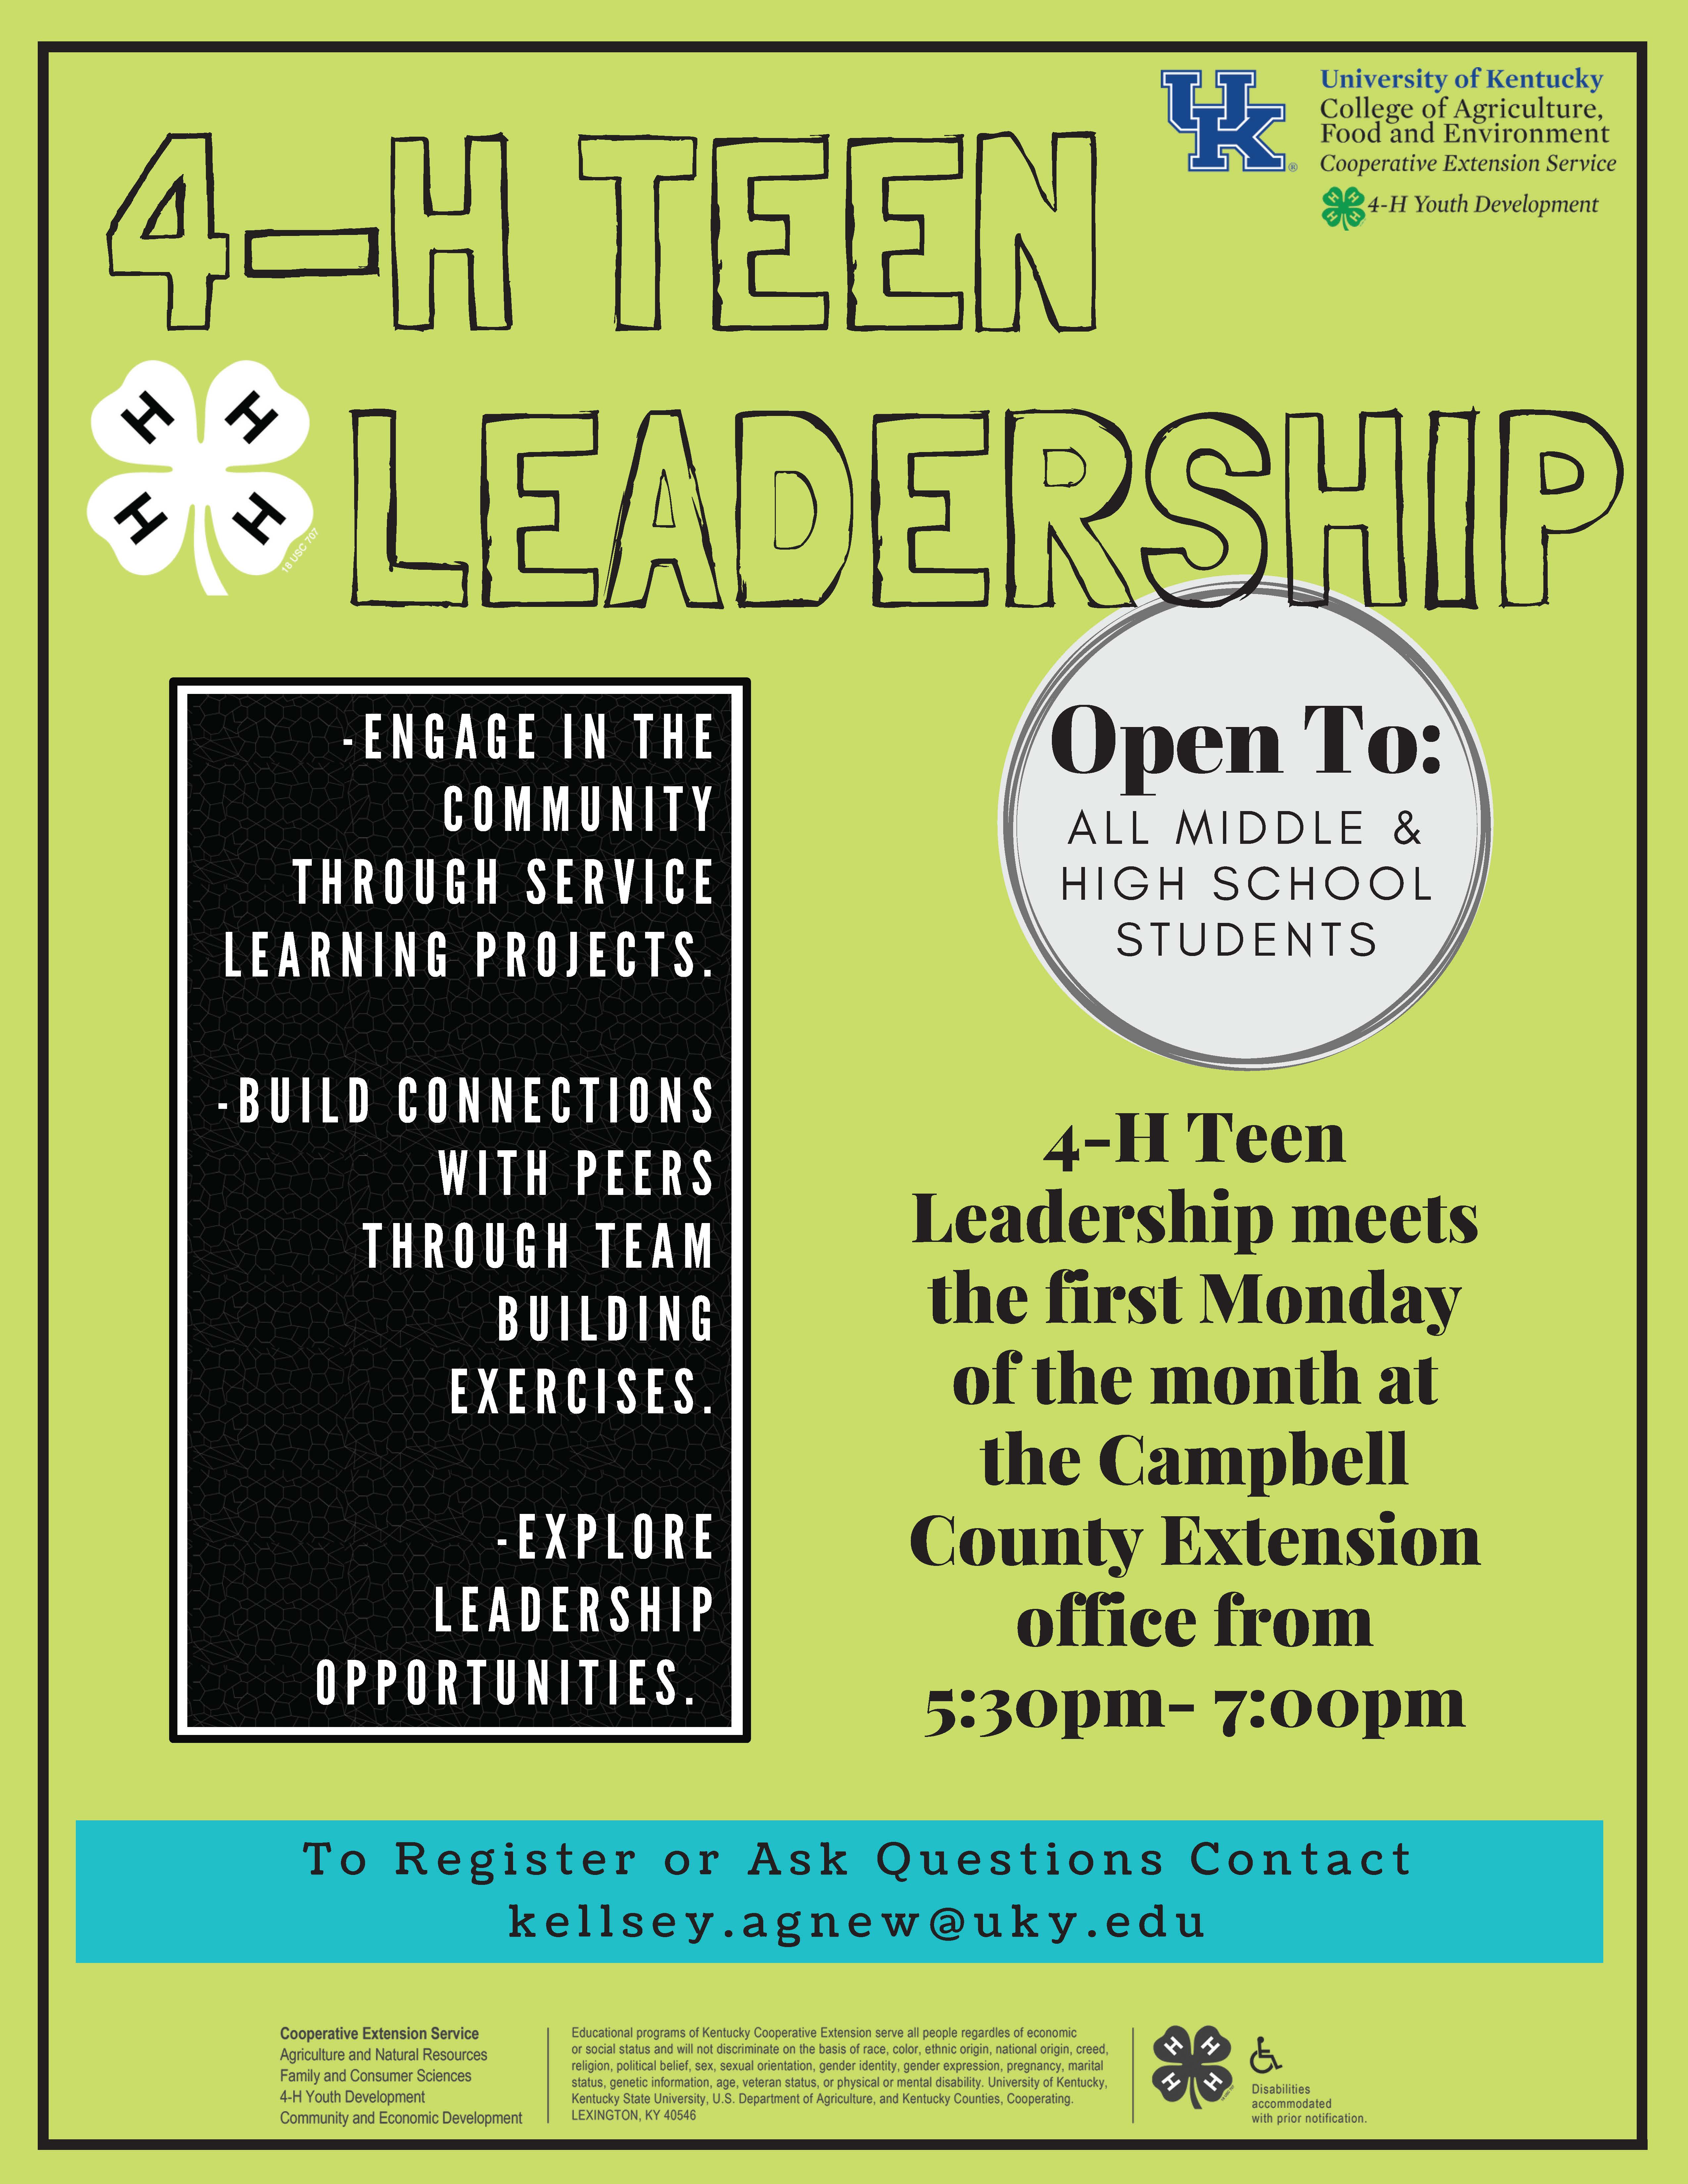 4-H Teen Leadership Club meets the first Monday of the month at the Campbell County Extension Office from 5:30-7:30pm. Email Kellsey Agnew at kellsey.agnew@uky.edu to register.